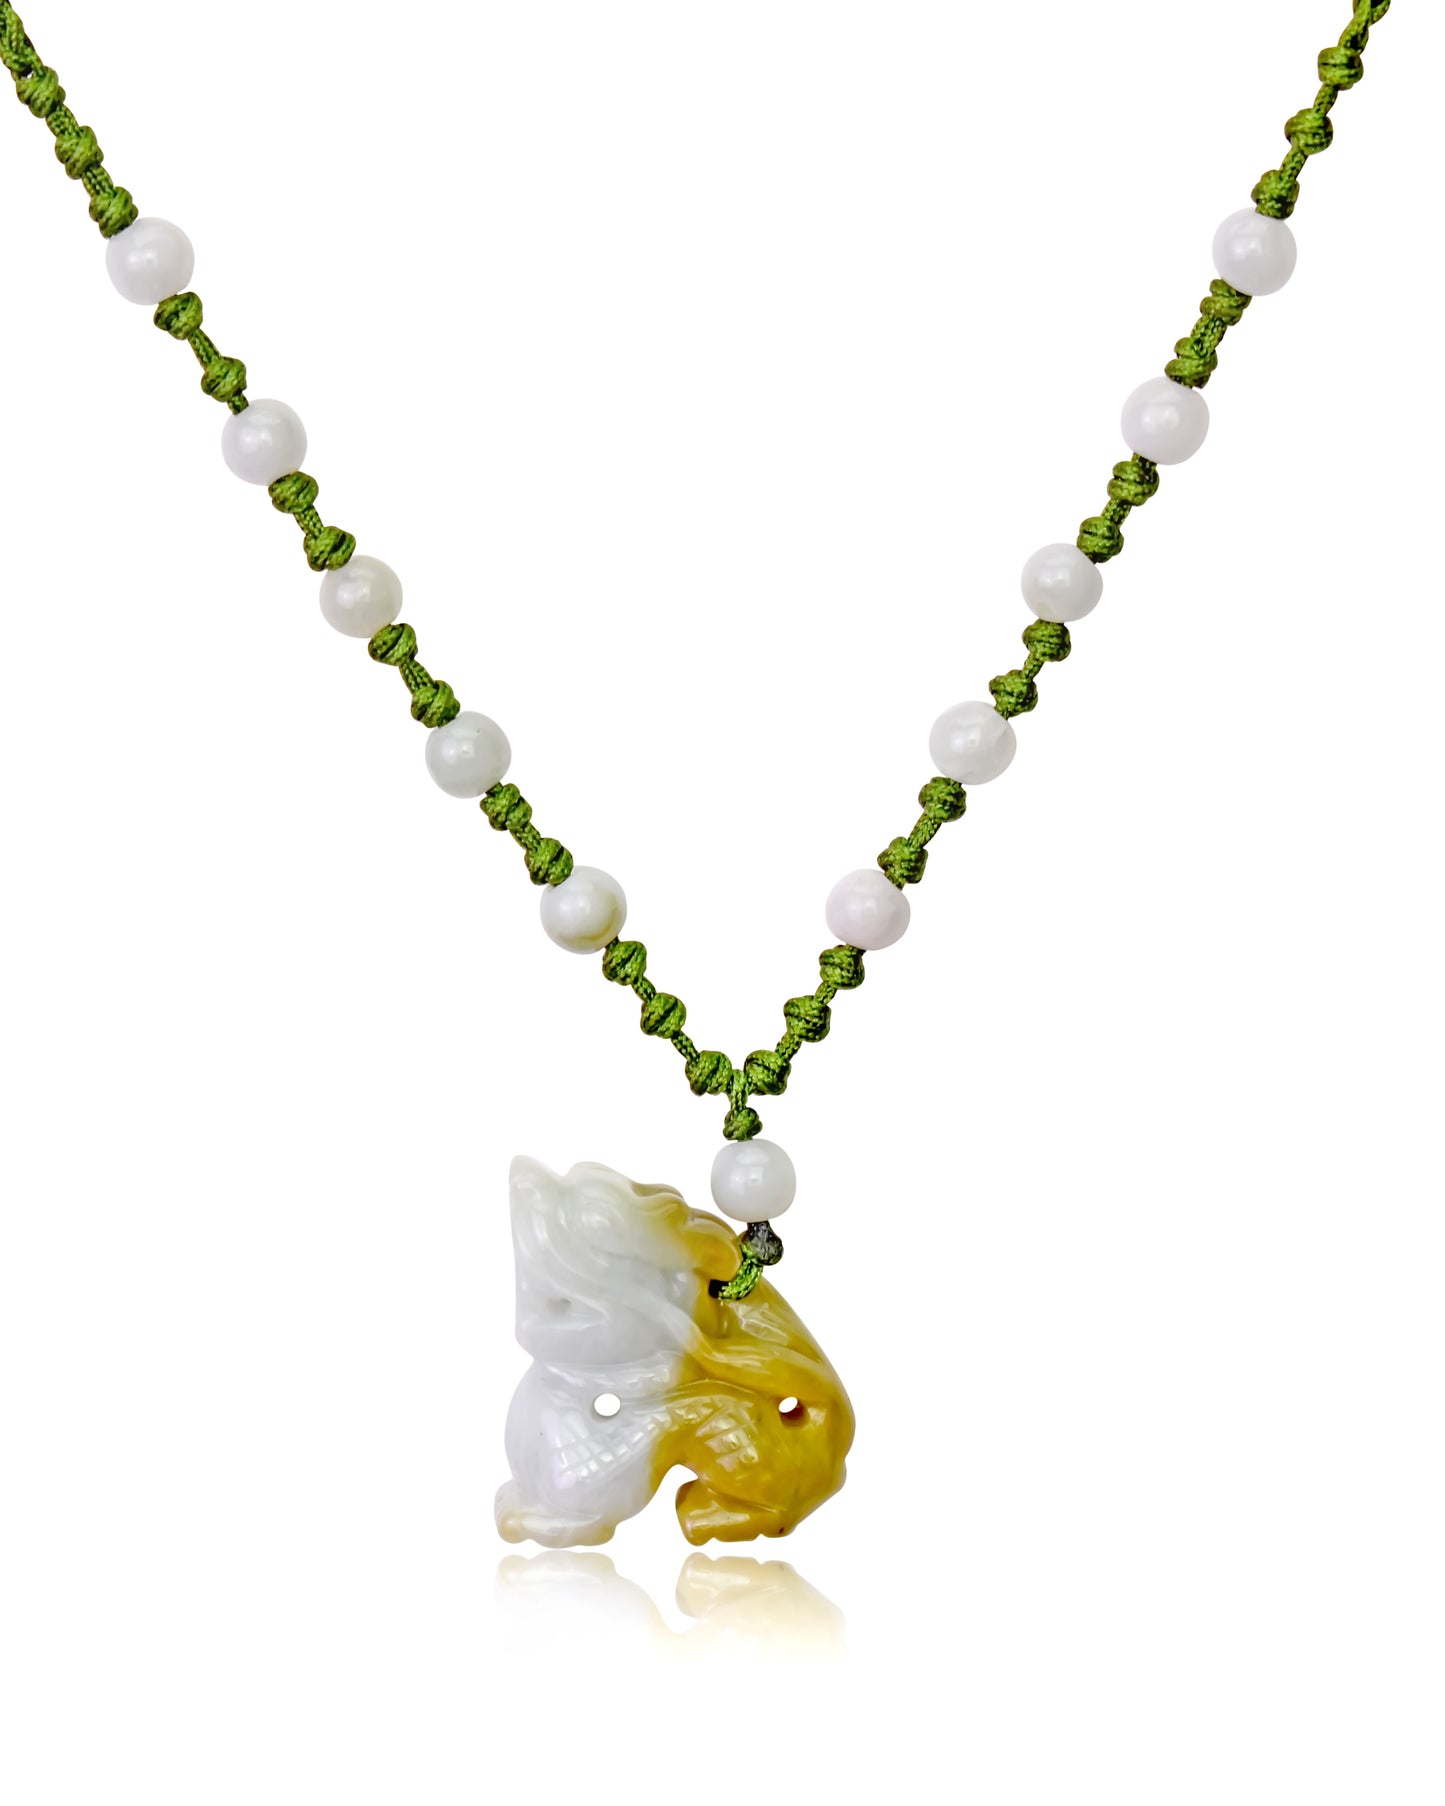 Show off Your Charismatic Dragon Style with a Zodiac Jade Necklace